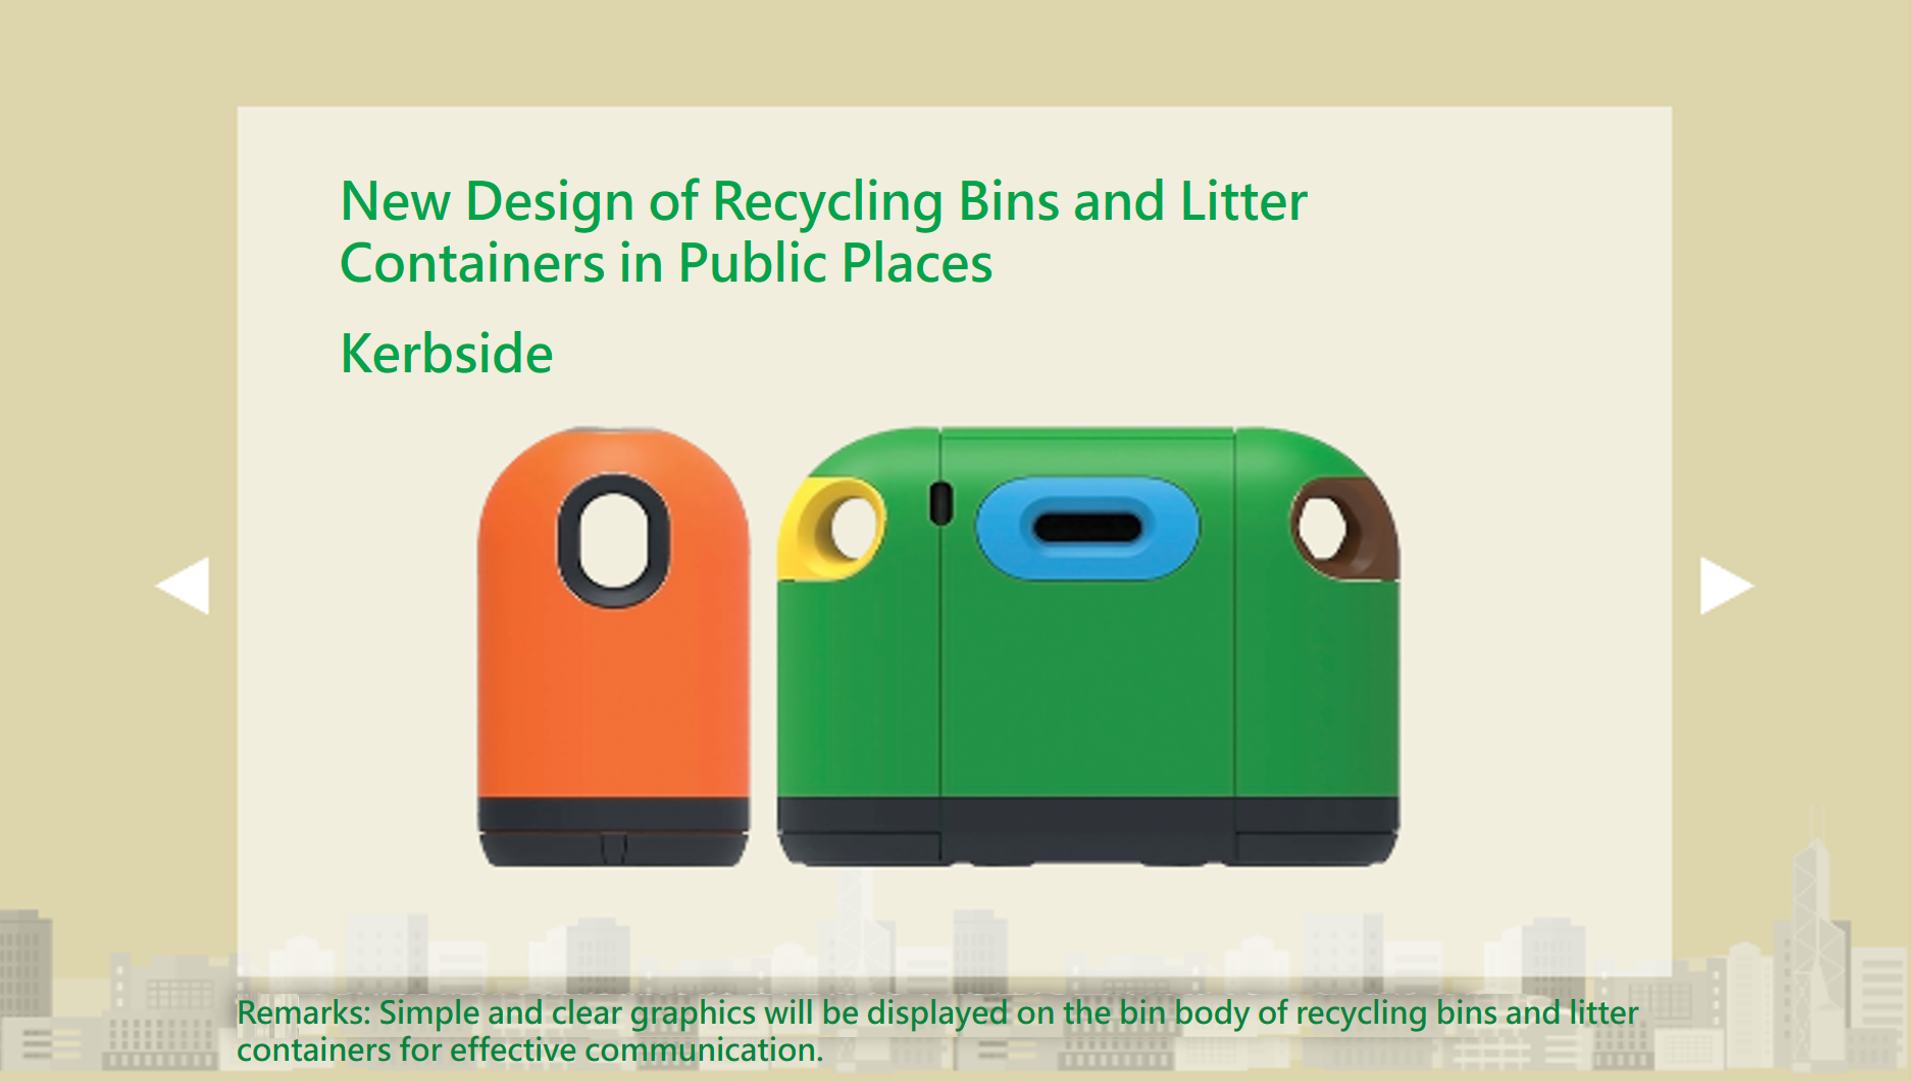 New Design of Recycling Bins and Litter Containers in Public Places - Kerbside